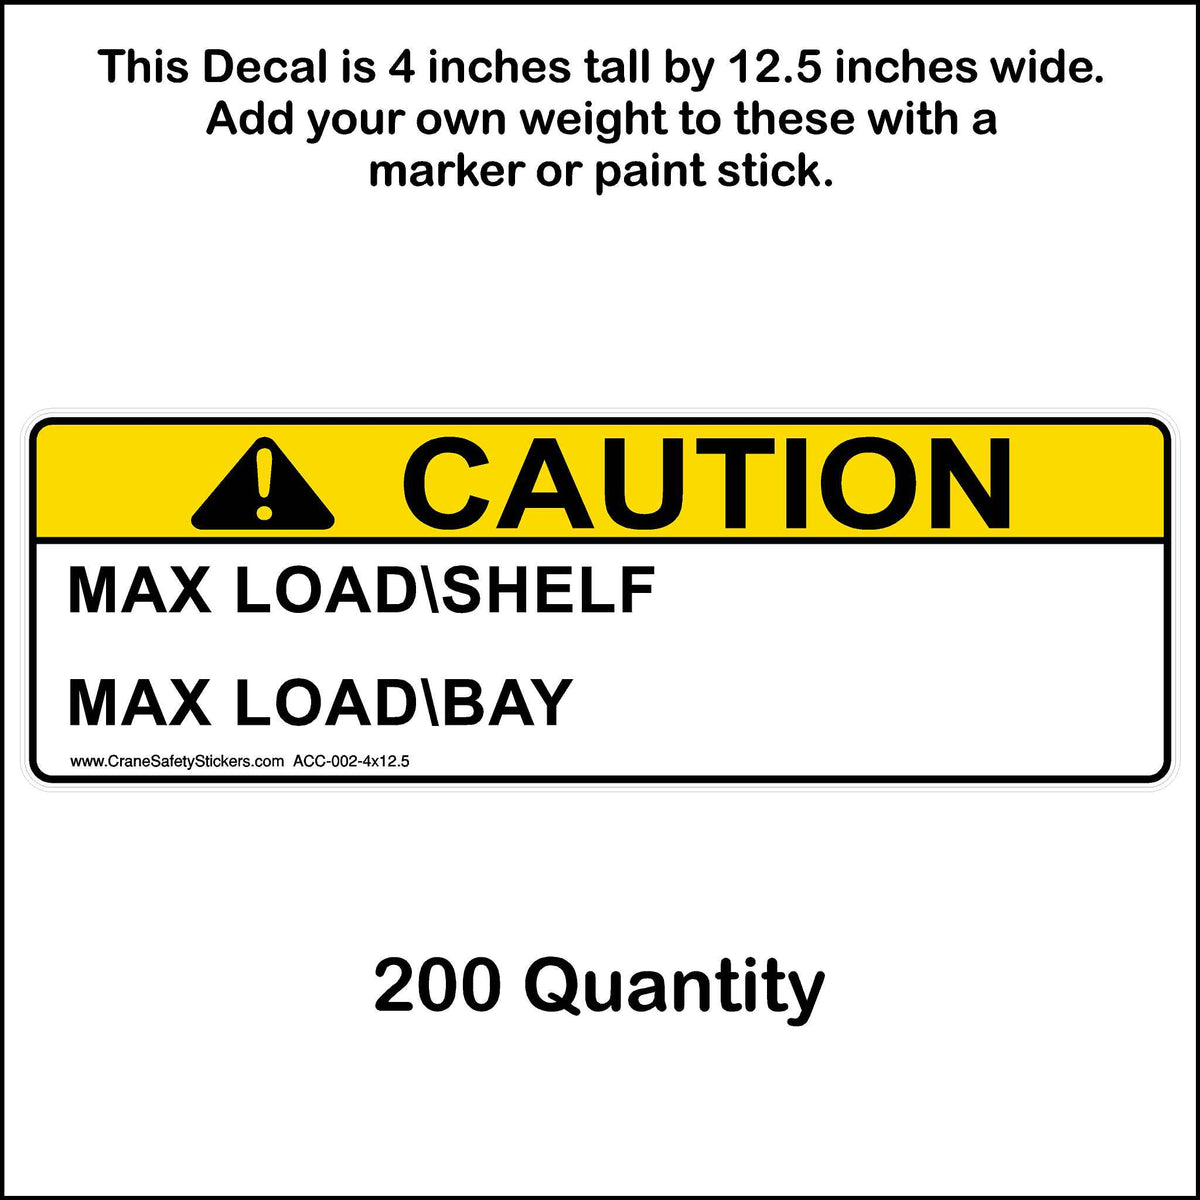 4 inch by 12.5 inch Max load shelf and max load bay sticker 200 quantity.